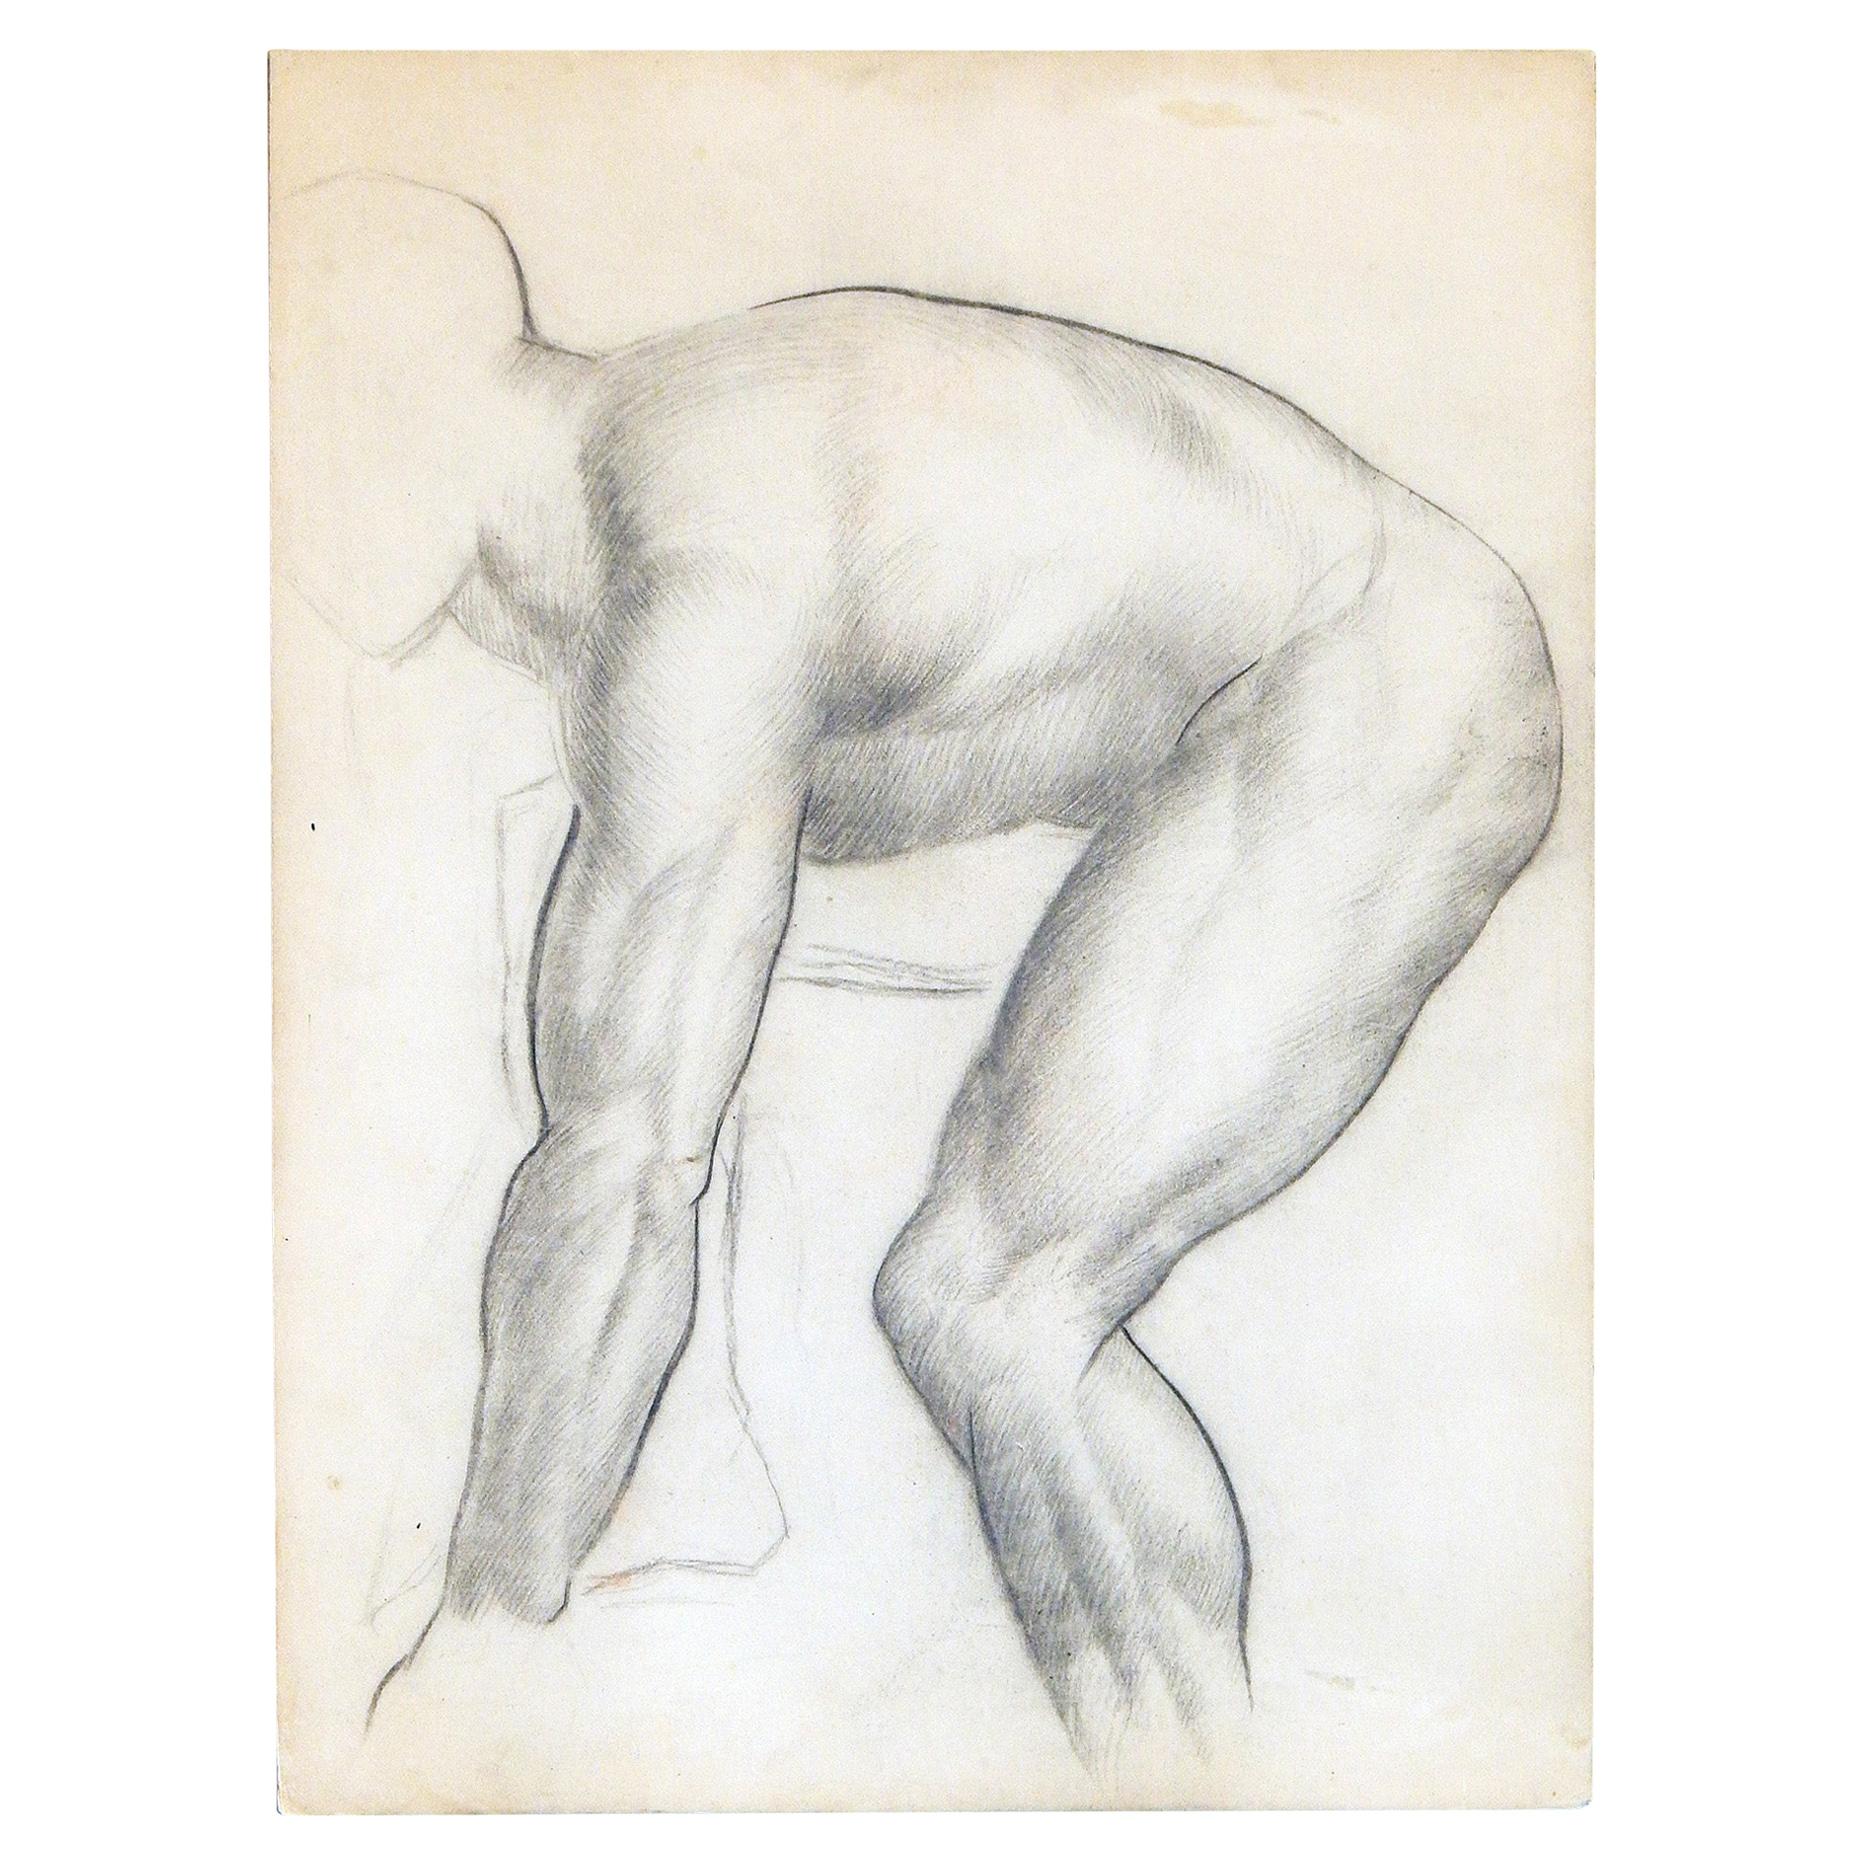 "Bent Over, " Finely Detailed Drawing of Nude Male Figure by Zimmerman